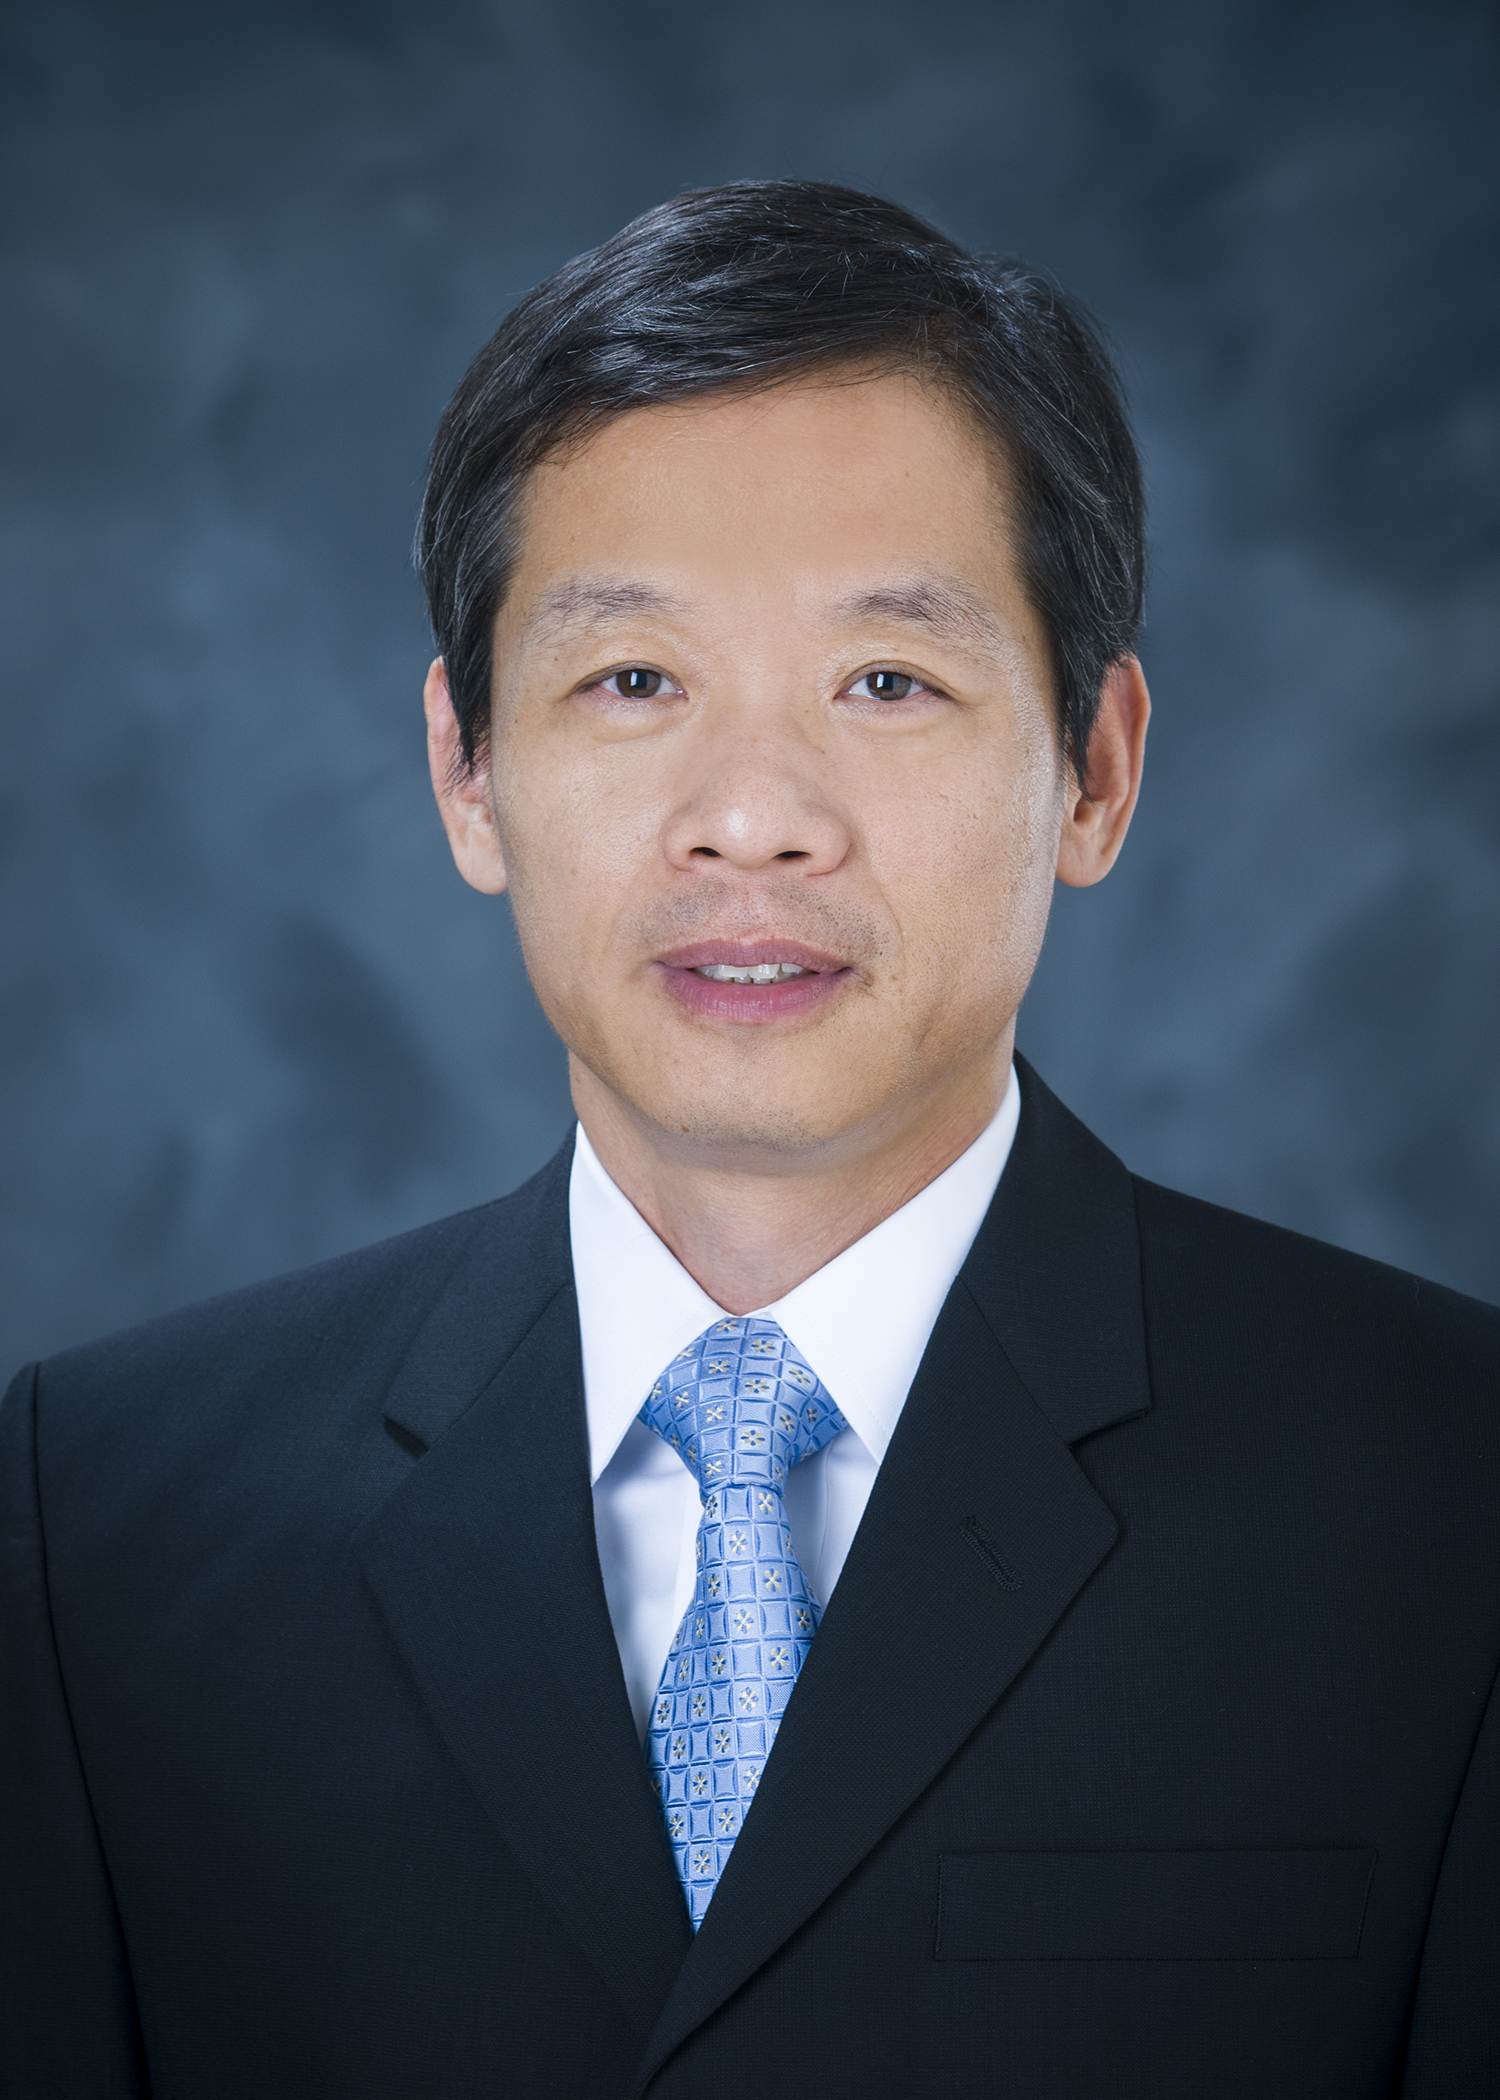 Professional photo of Qingmin Meng, wearing a blue tie and dark suit against a blue background.